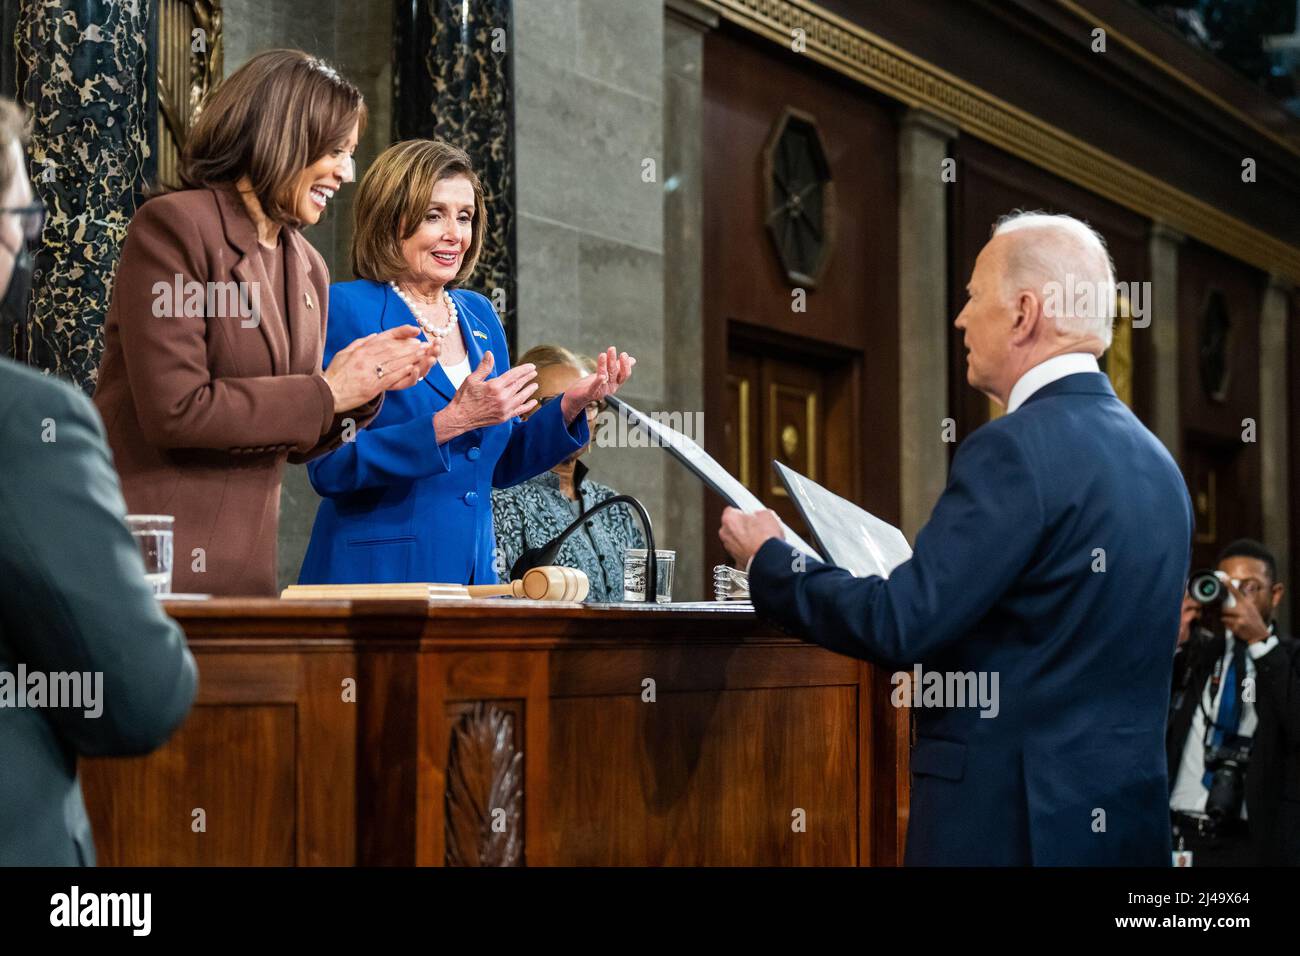 President Joe Biden presents copies of his State of the Union address to Vice President Kamala Harris and House Speaker Nancy Pelosi before delivering the address to a joint session of Congress, Tuesday, March 1, 2022, in the House Chamber at the U.S. Capitol in Washington, D.C. (Official White House Photo by Adam Schultz) Stock Photo